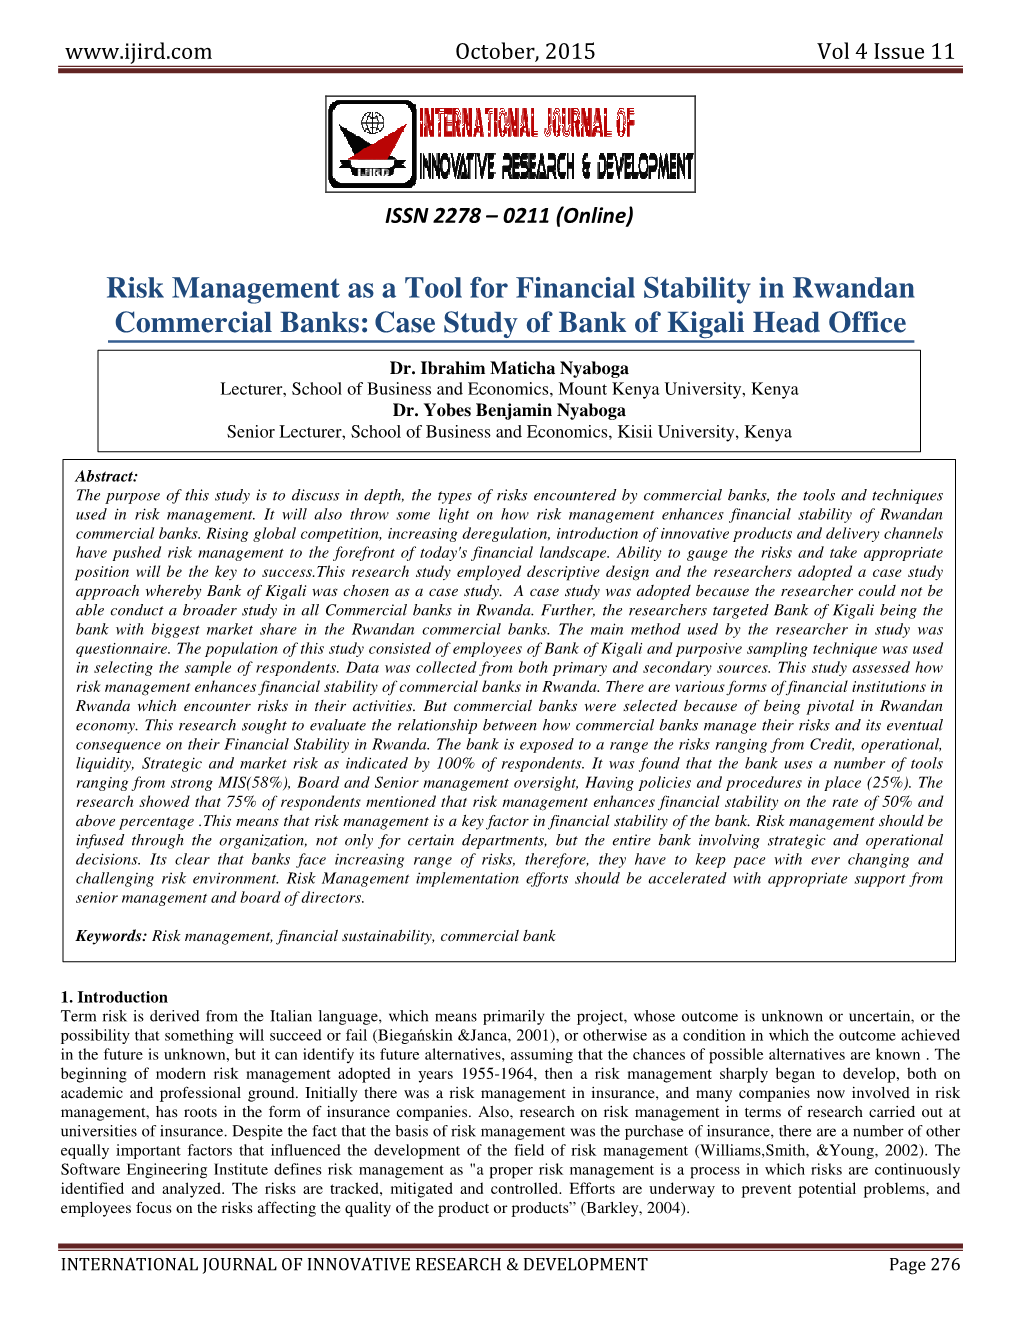 Risk Management As a Tool for Financial Stability in Rwandan Commercial Banks:Case Study of Bank of Kigali Head Office